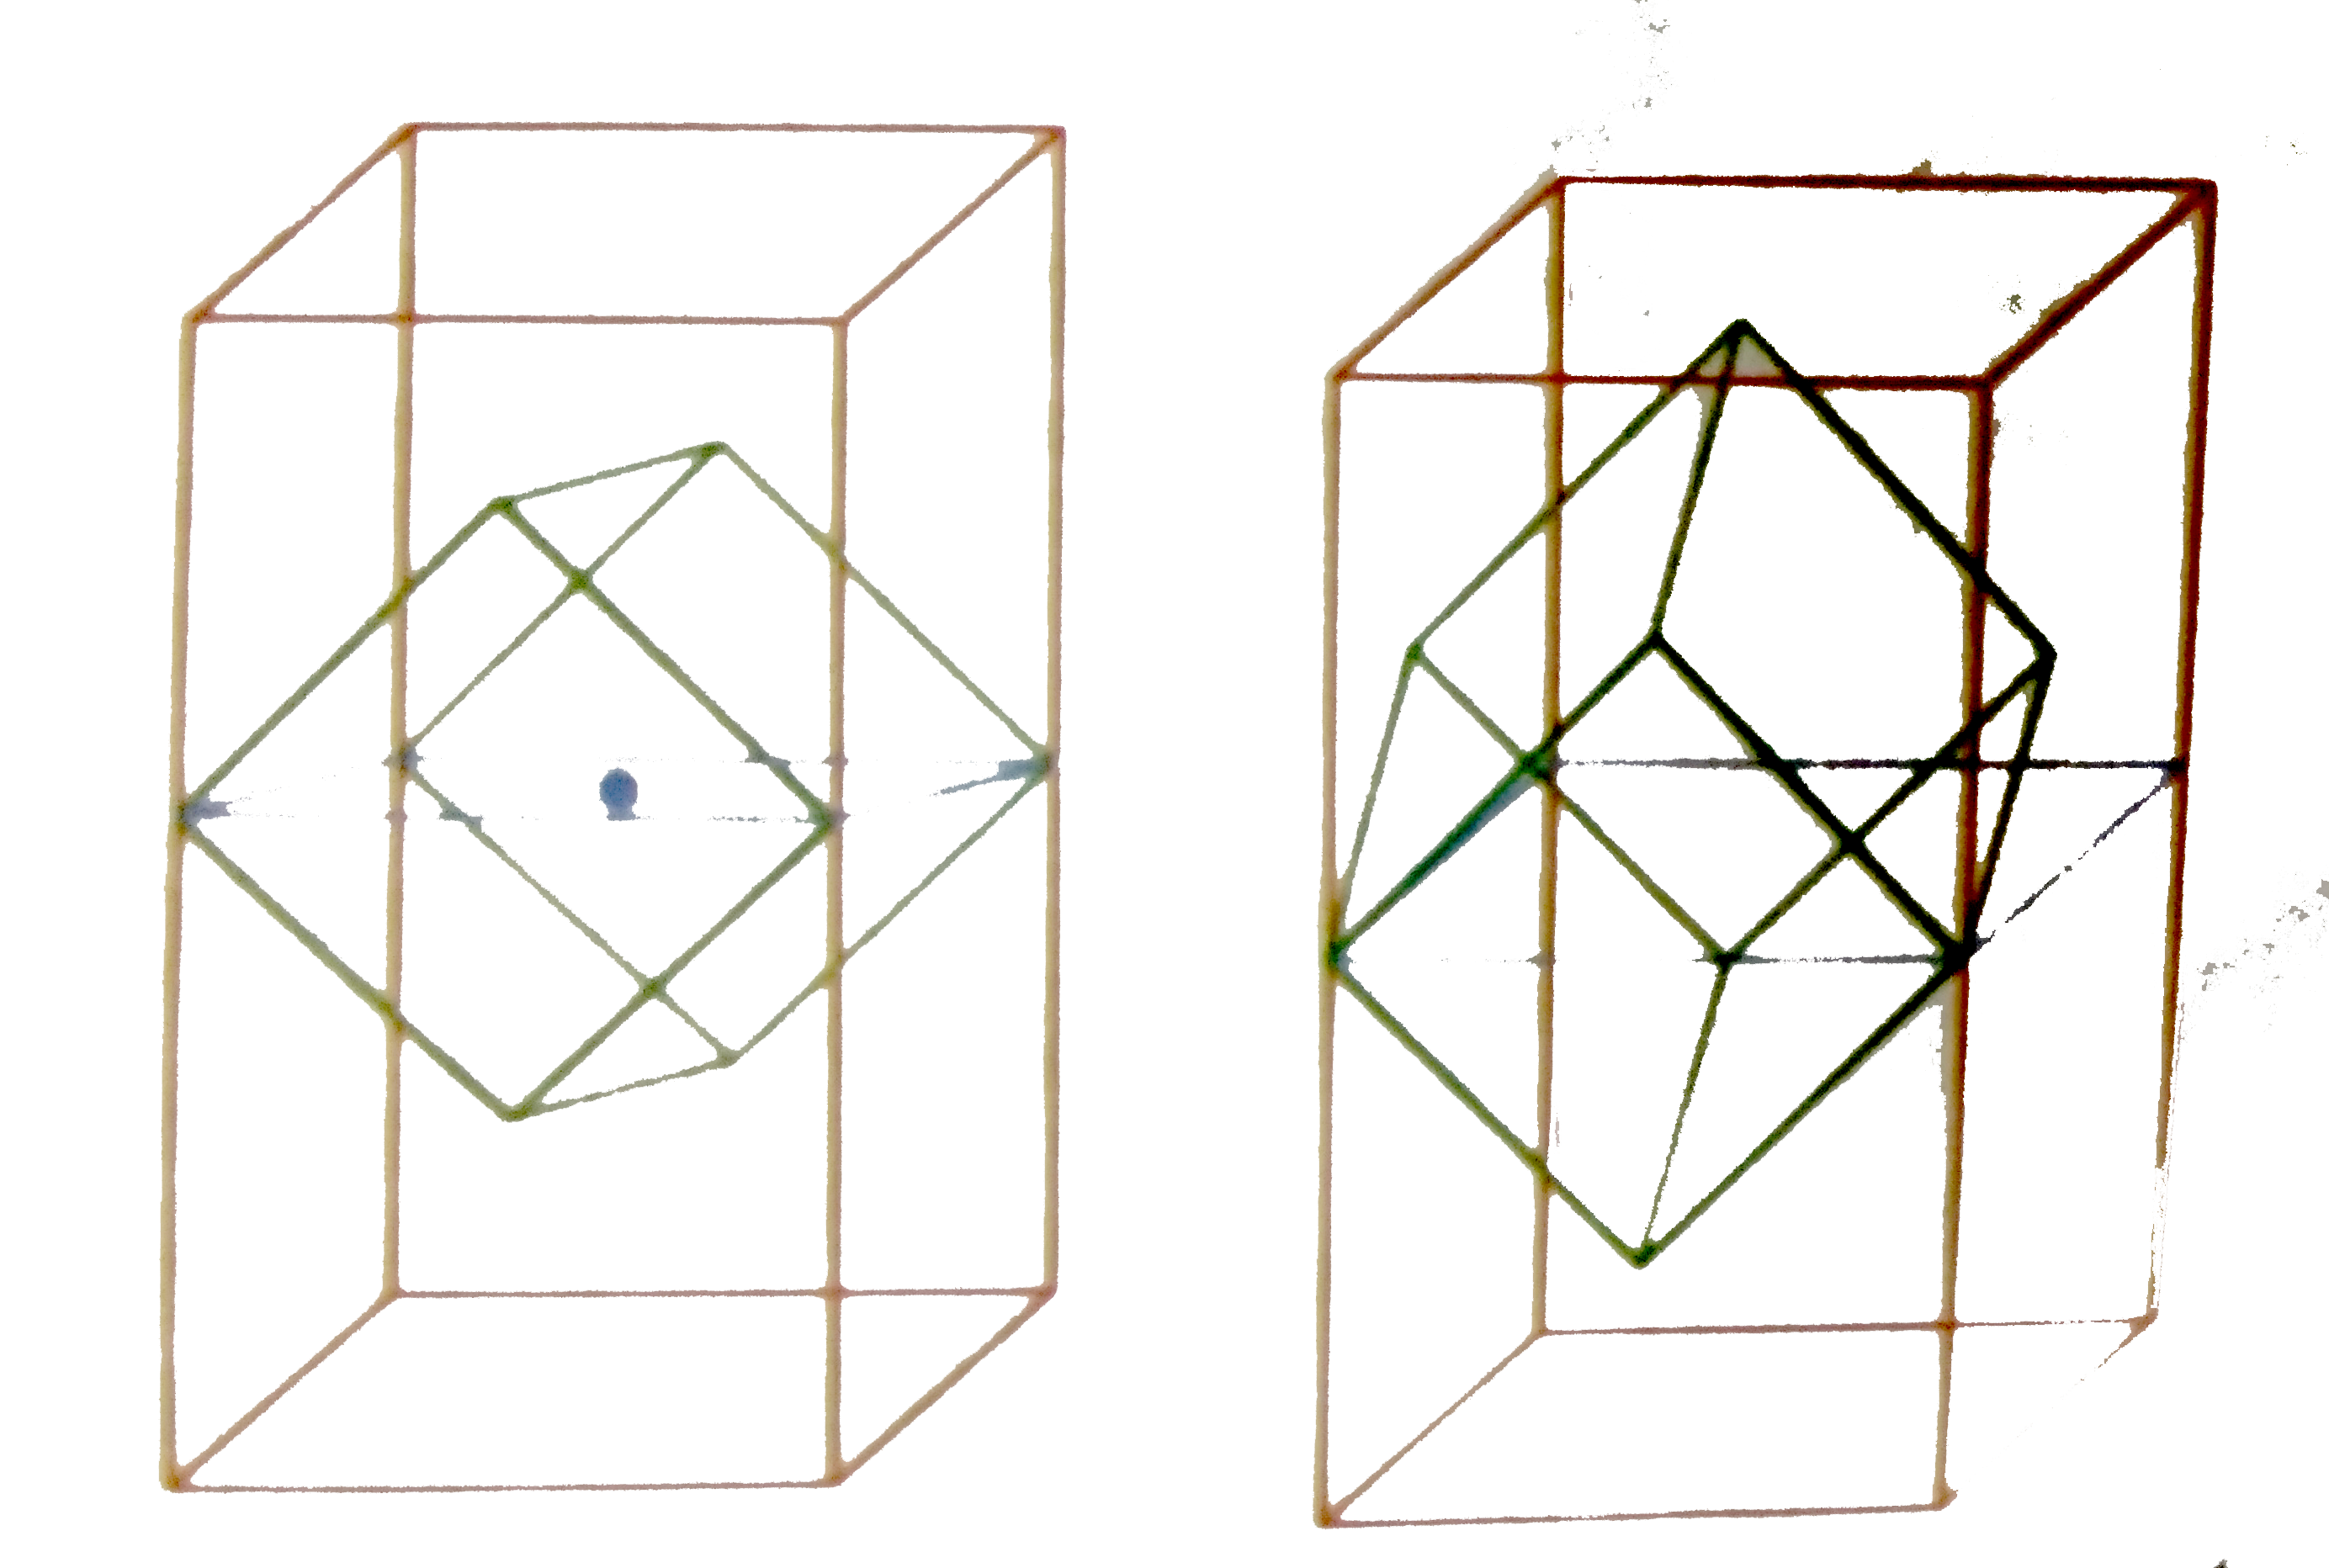 Face centered cubic lattice of NaCl may also smaller, tetragonal unit cell as shown below fig. (a,b)      The number of formula units of NaCl present in the smaller unit cell drawn in (a) are